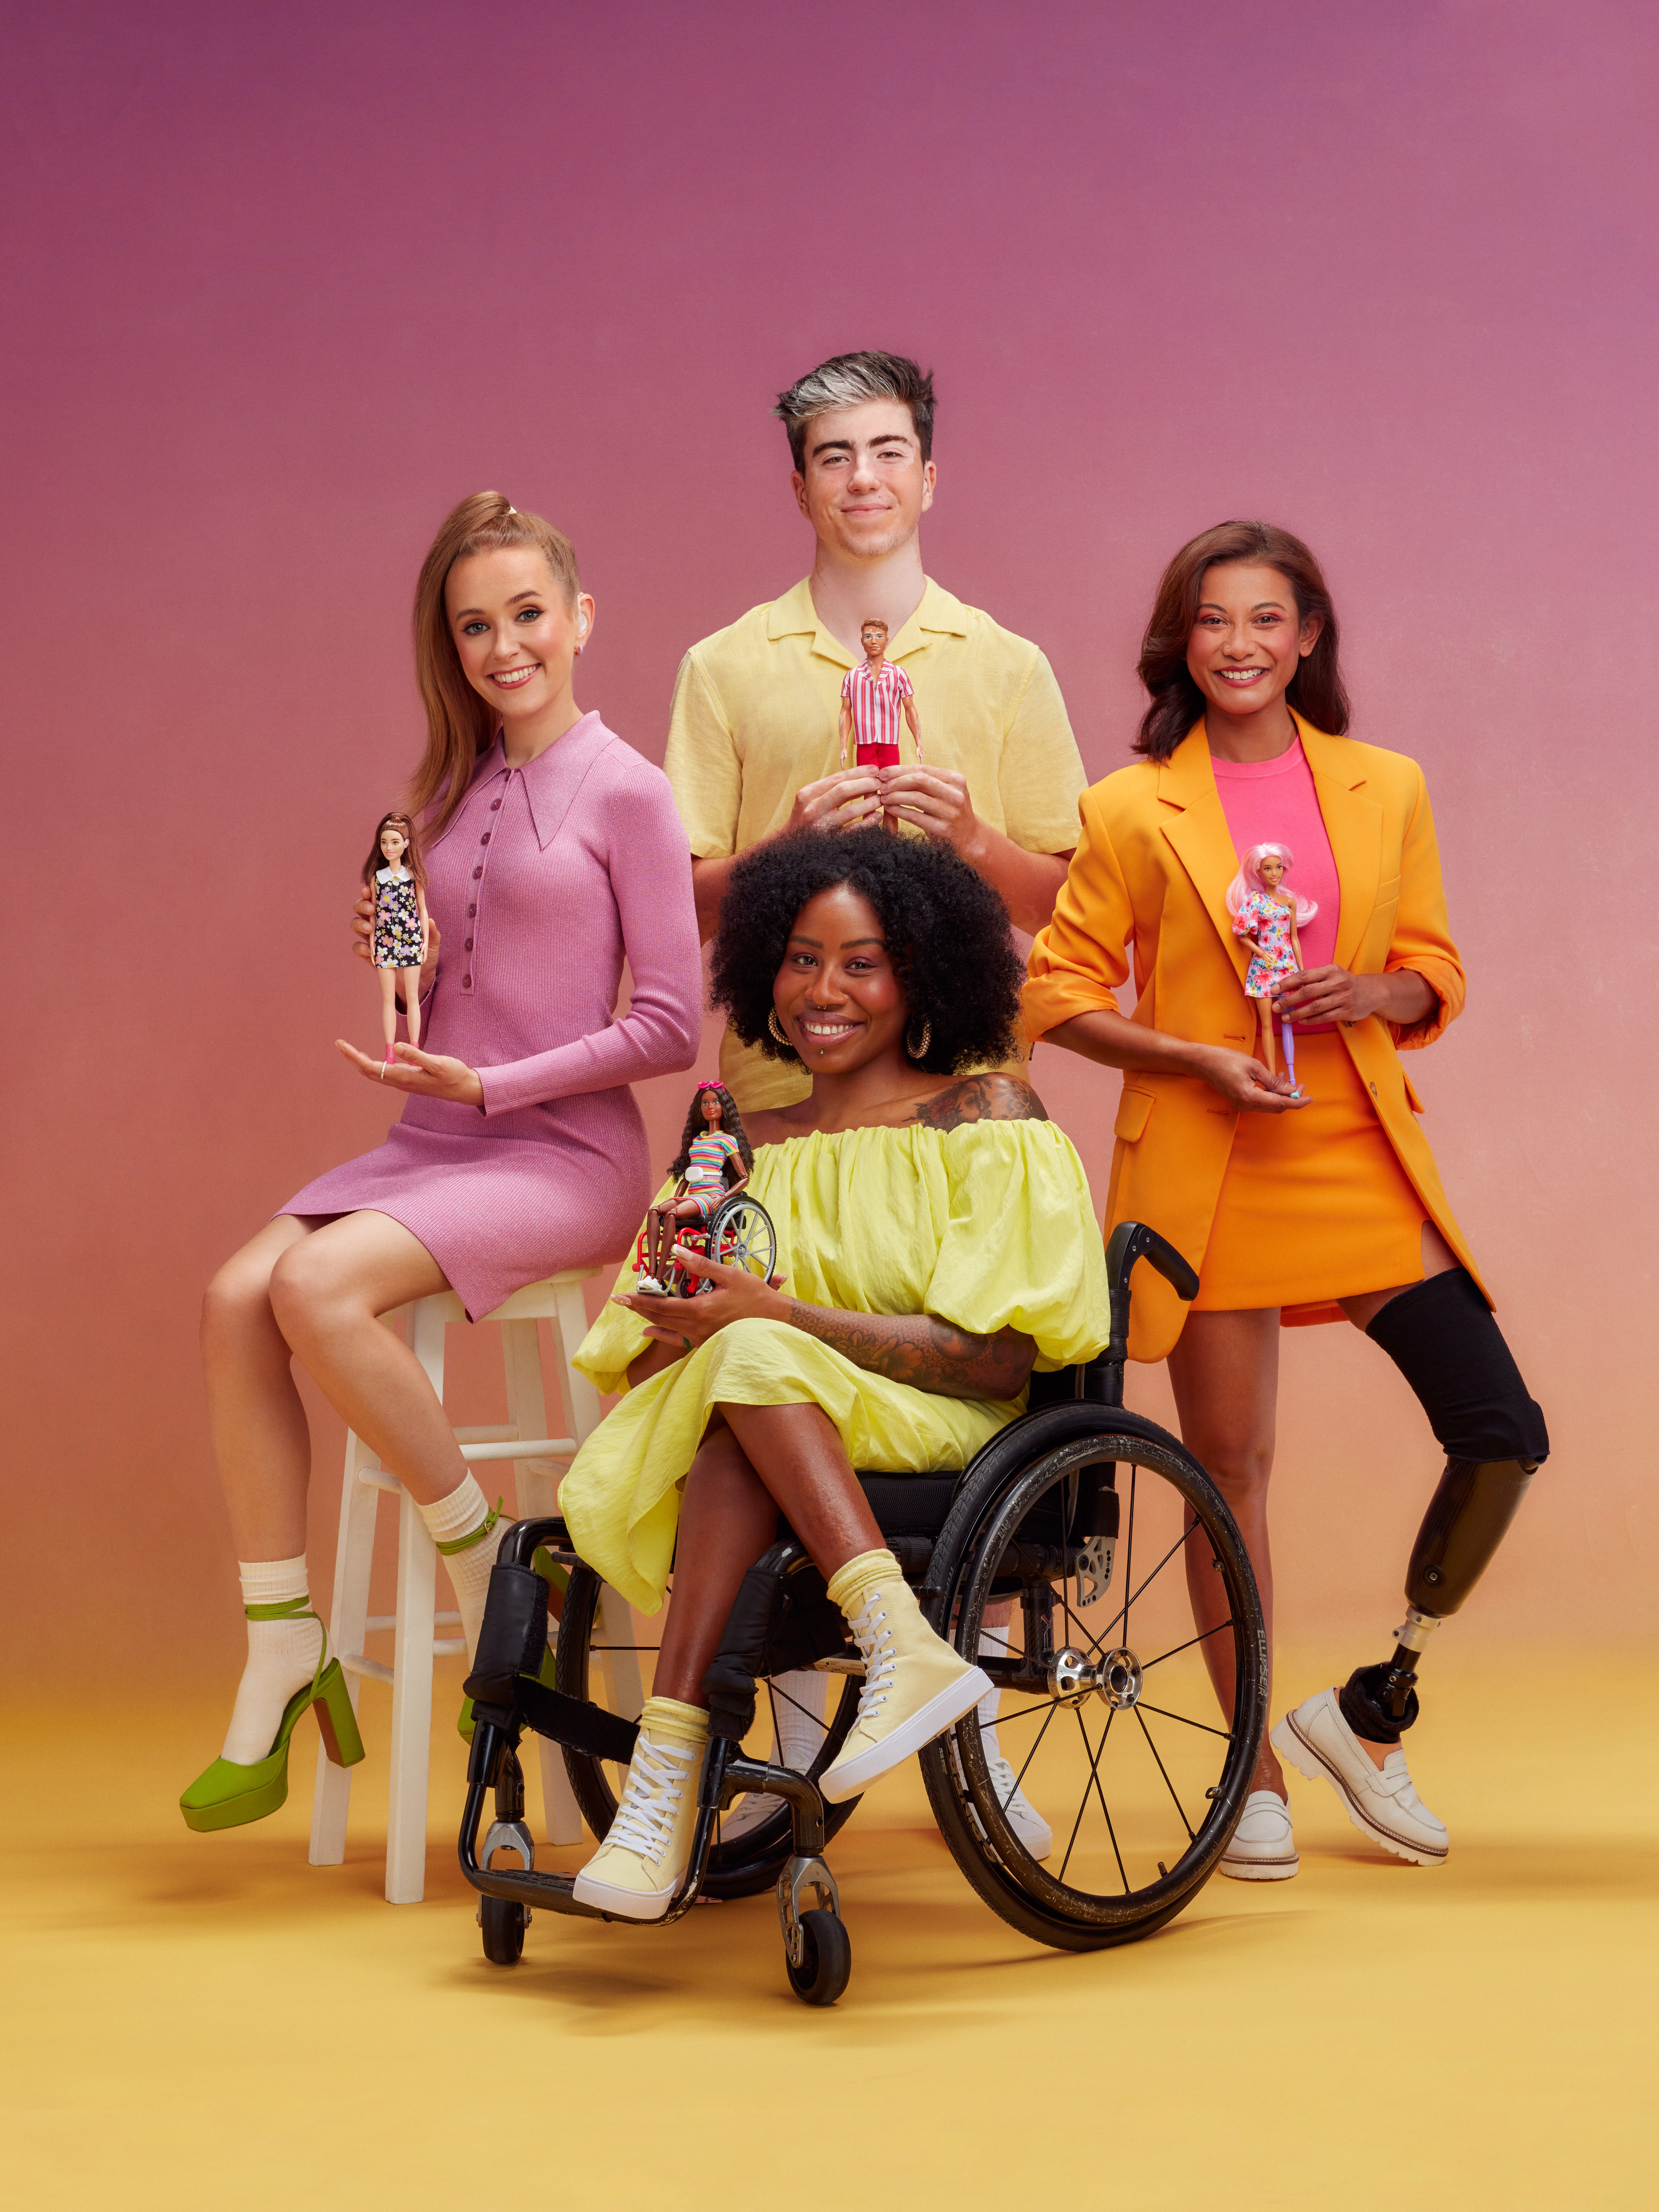 Ayling-Ellis is among the cast of diverse models who inspired Mattel’s new line of dolls, which includes the first Ken doll with vitiligo, a Barbie with a prosthetic leg, and another in a wheelchair